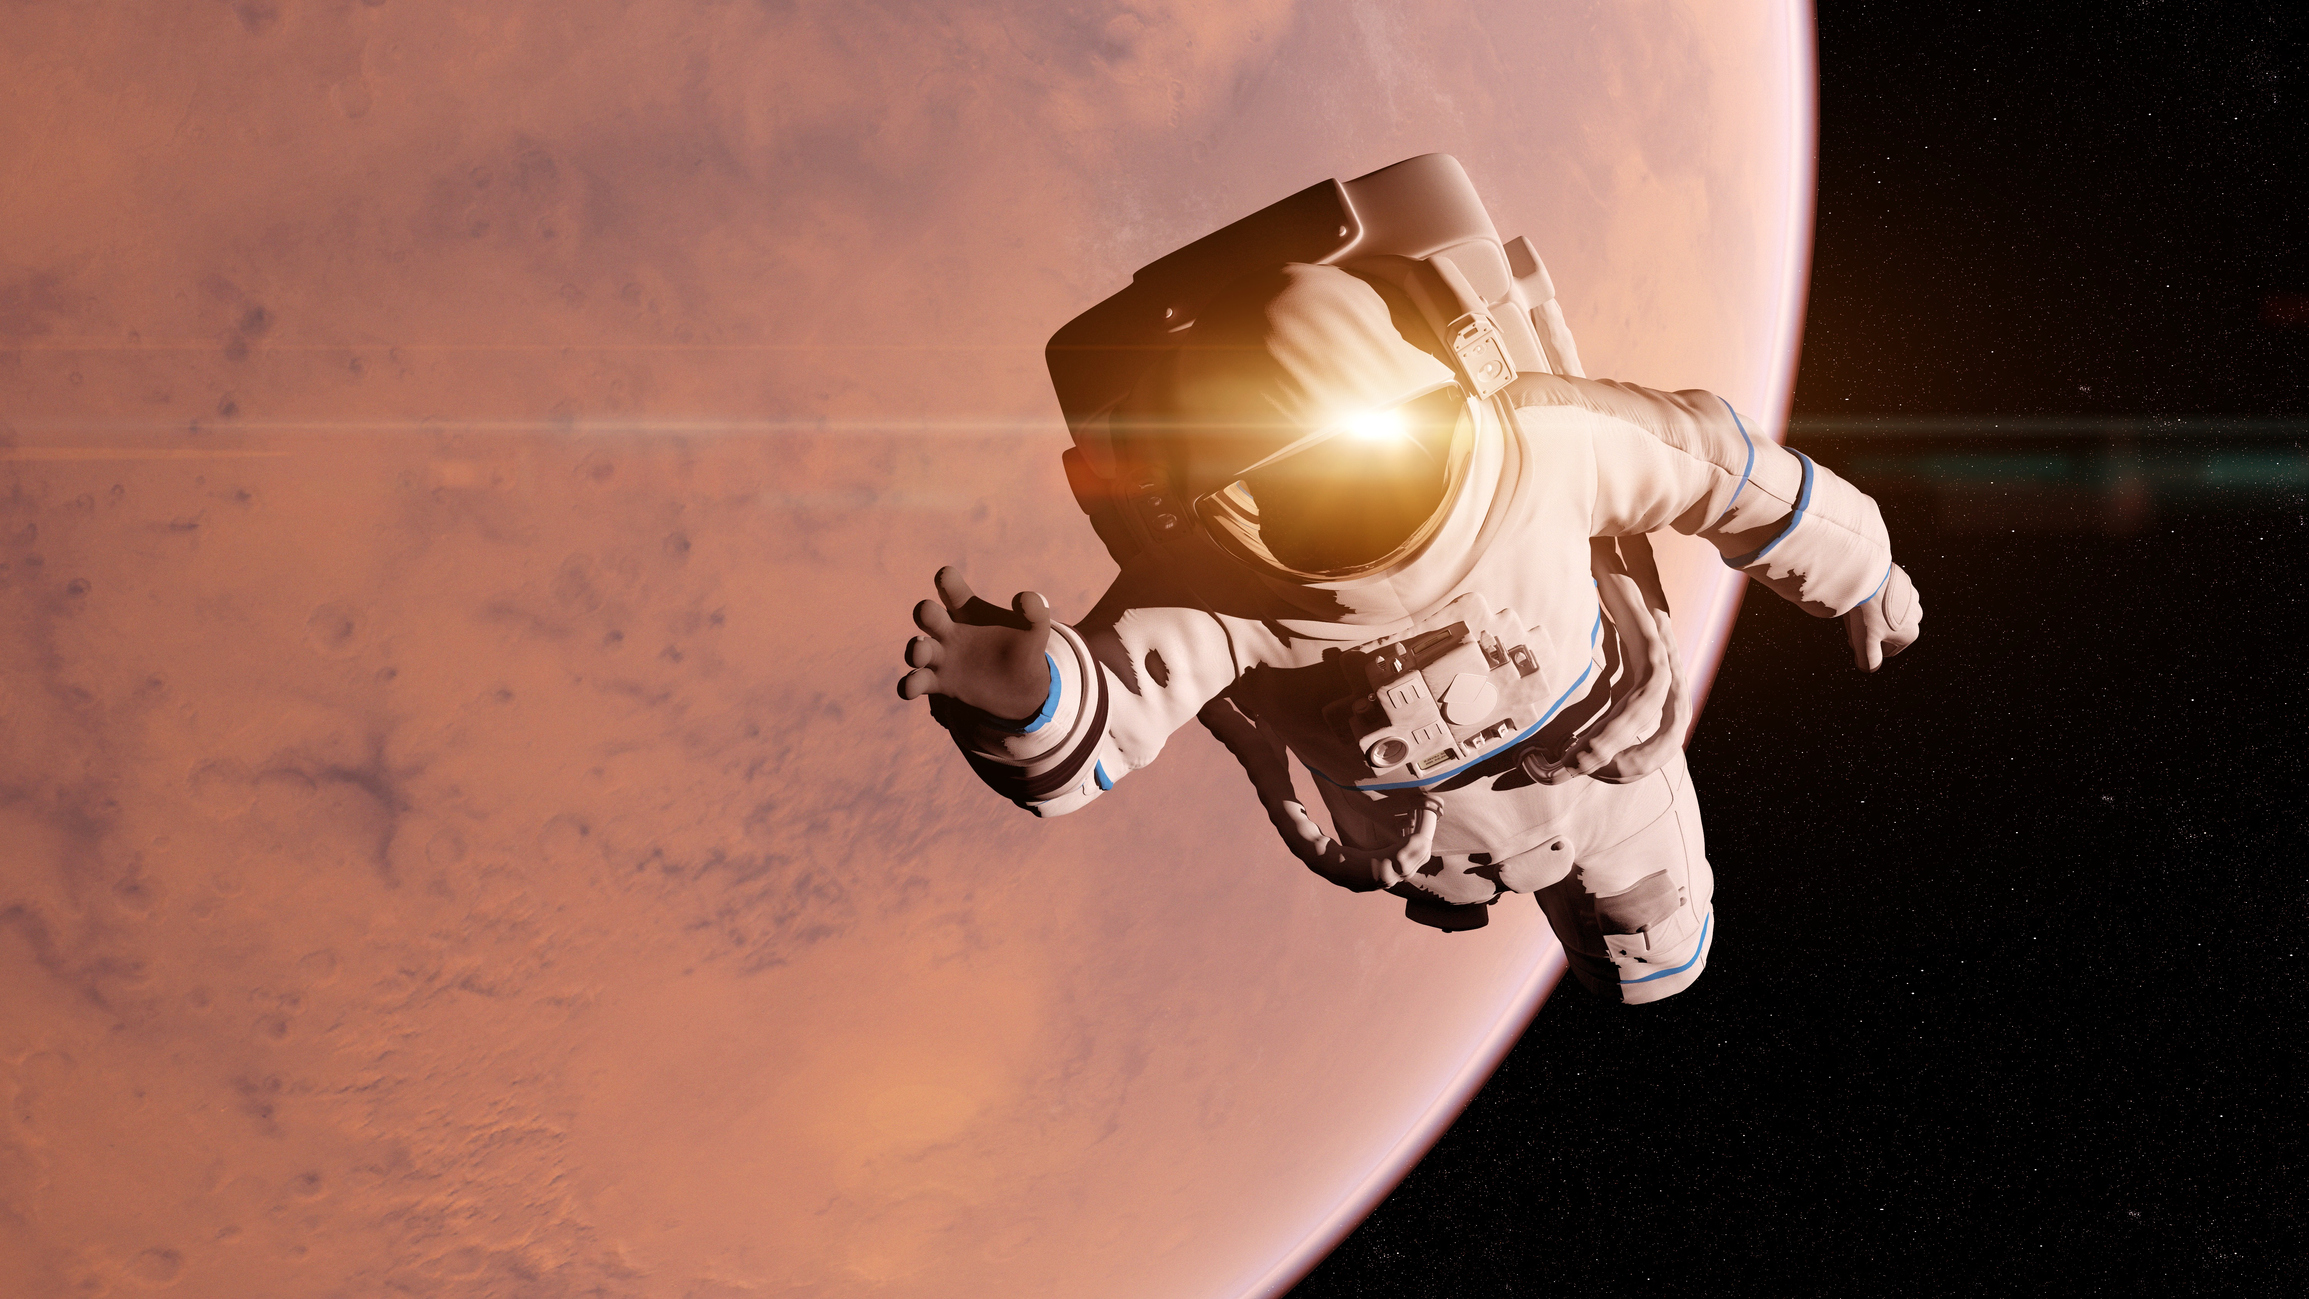 What Happens to Your Body If You Get Lost in Space?